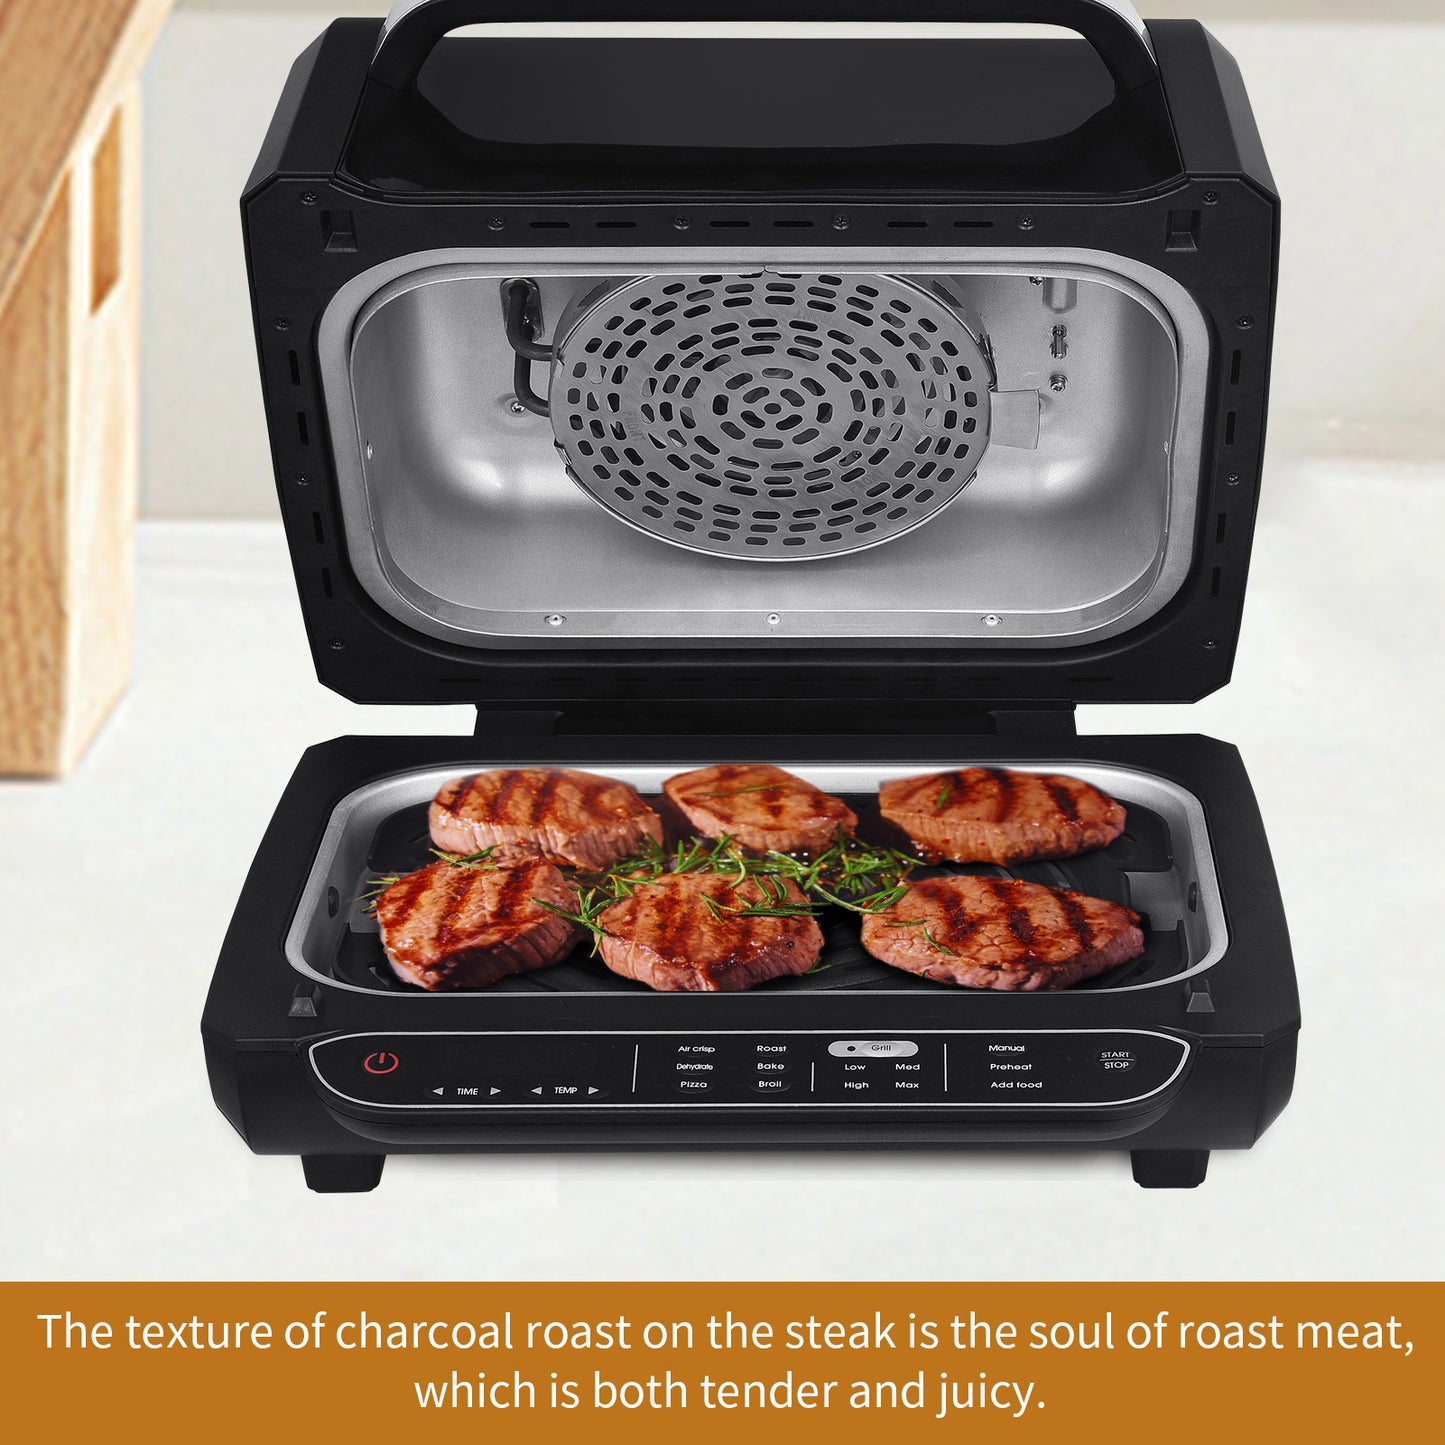 7-in-1 Countertop Grill